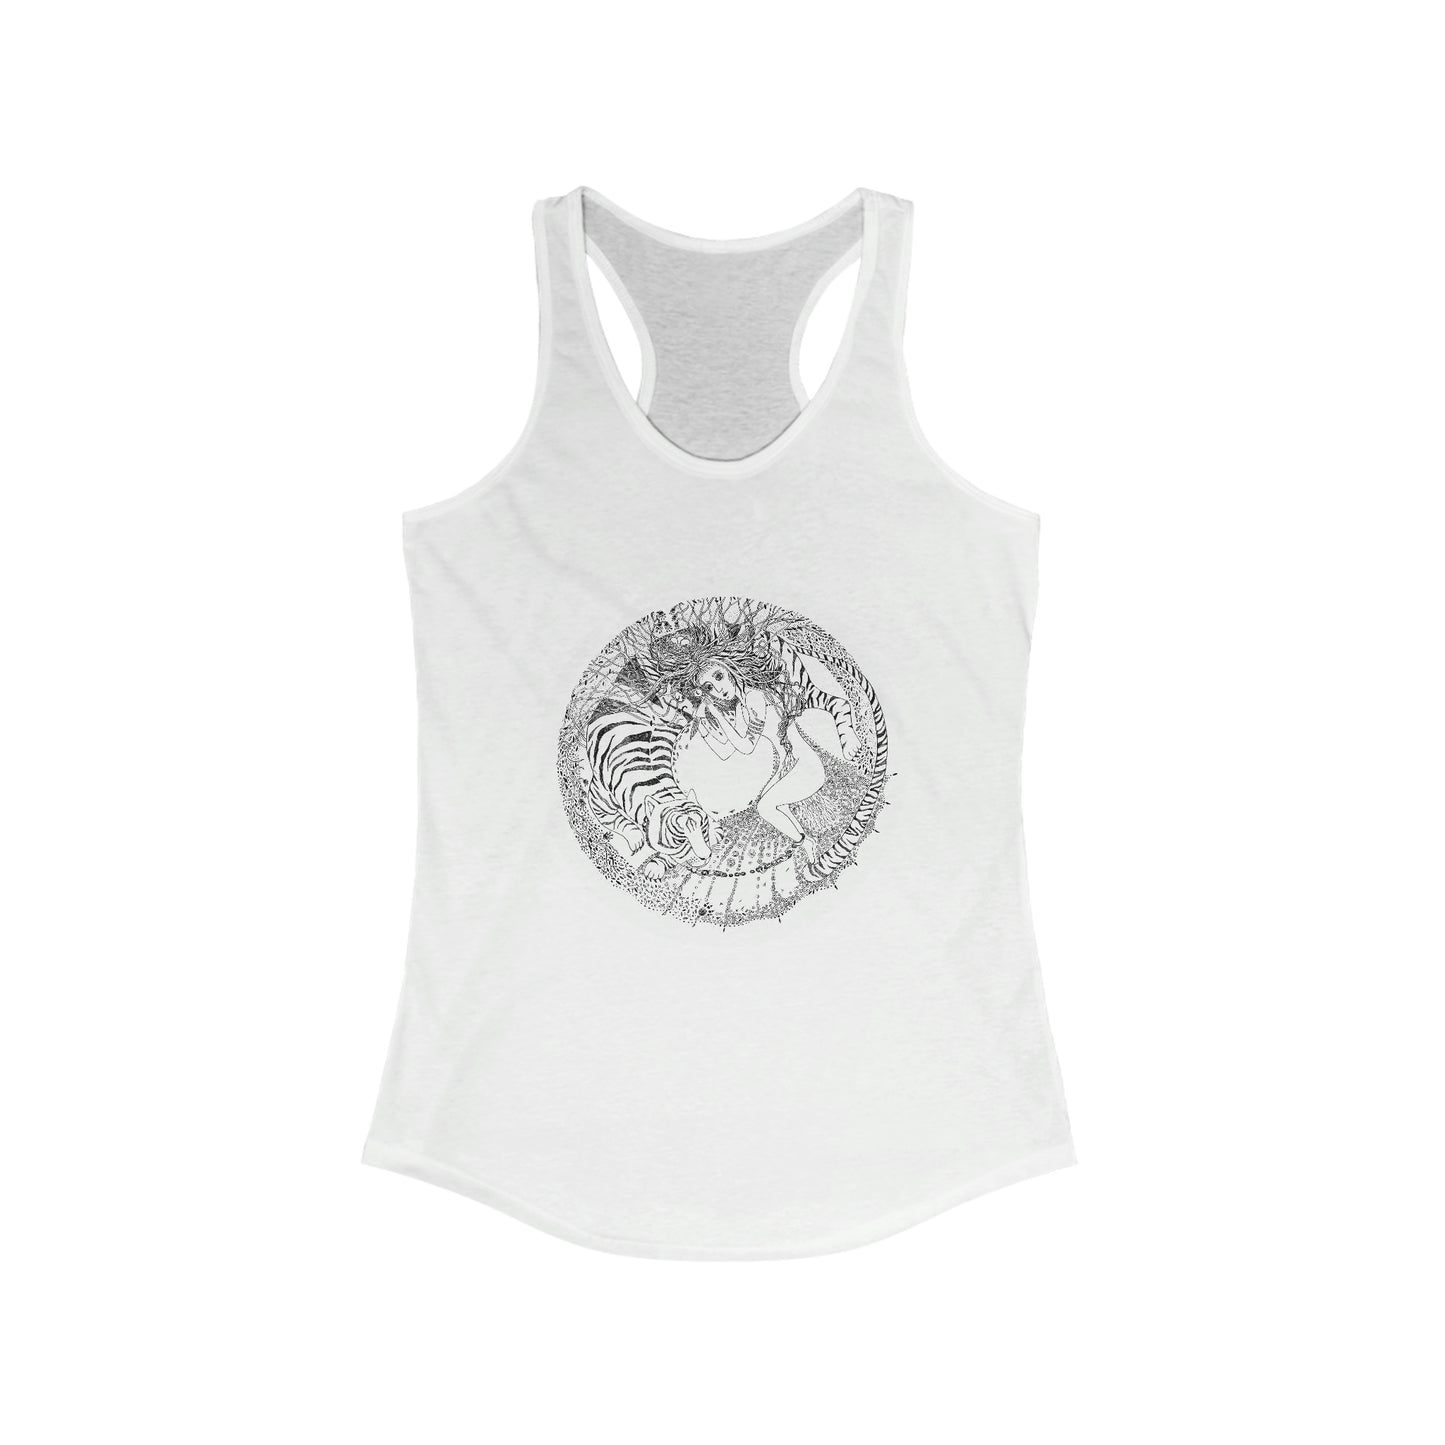 Chinese Zodiac Sign Tank Top (Tiger) Limited Edition